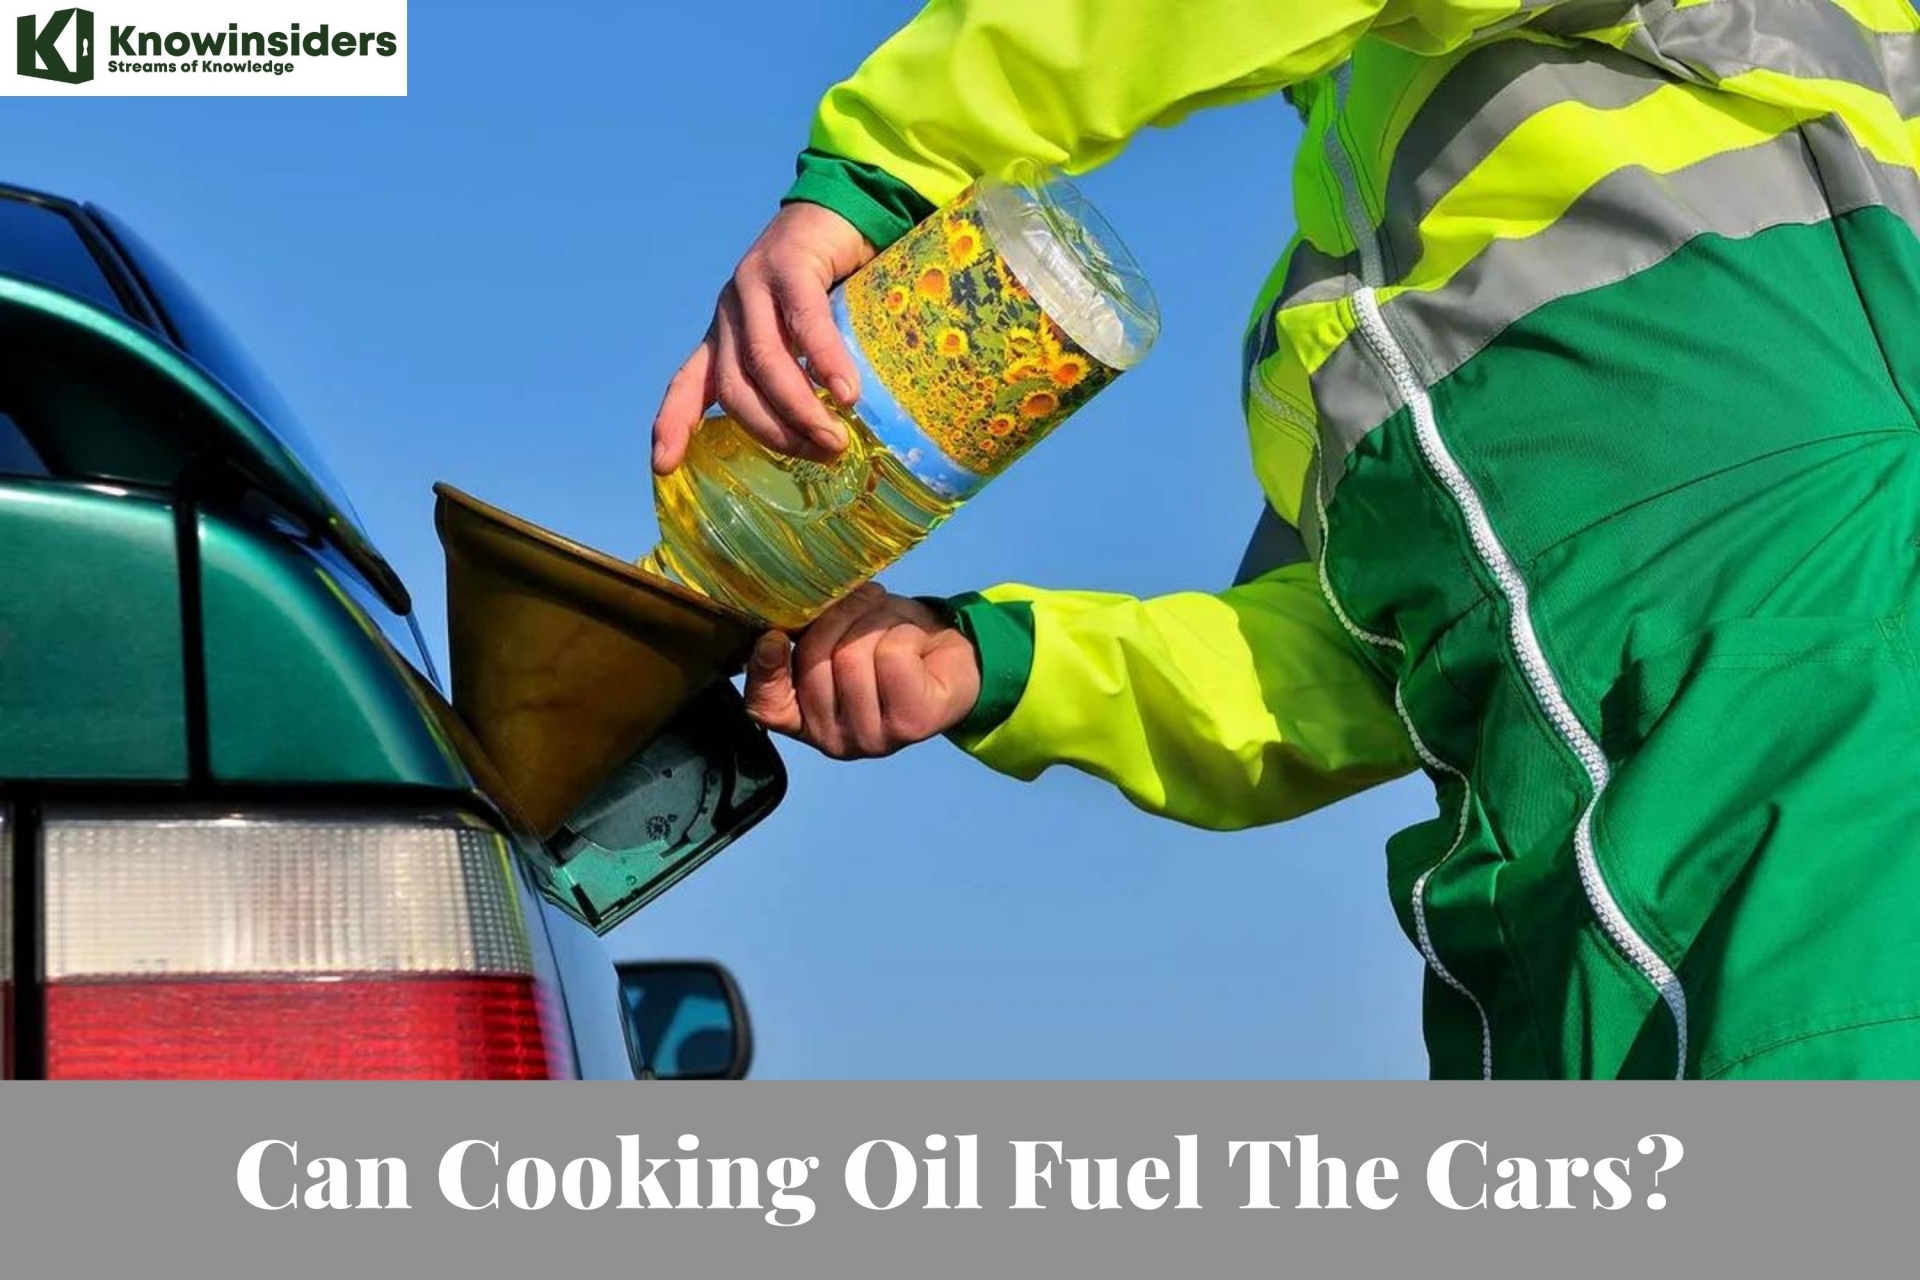 Can Cooking Oil Fuel The Cars?